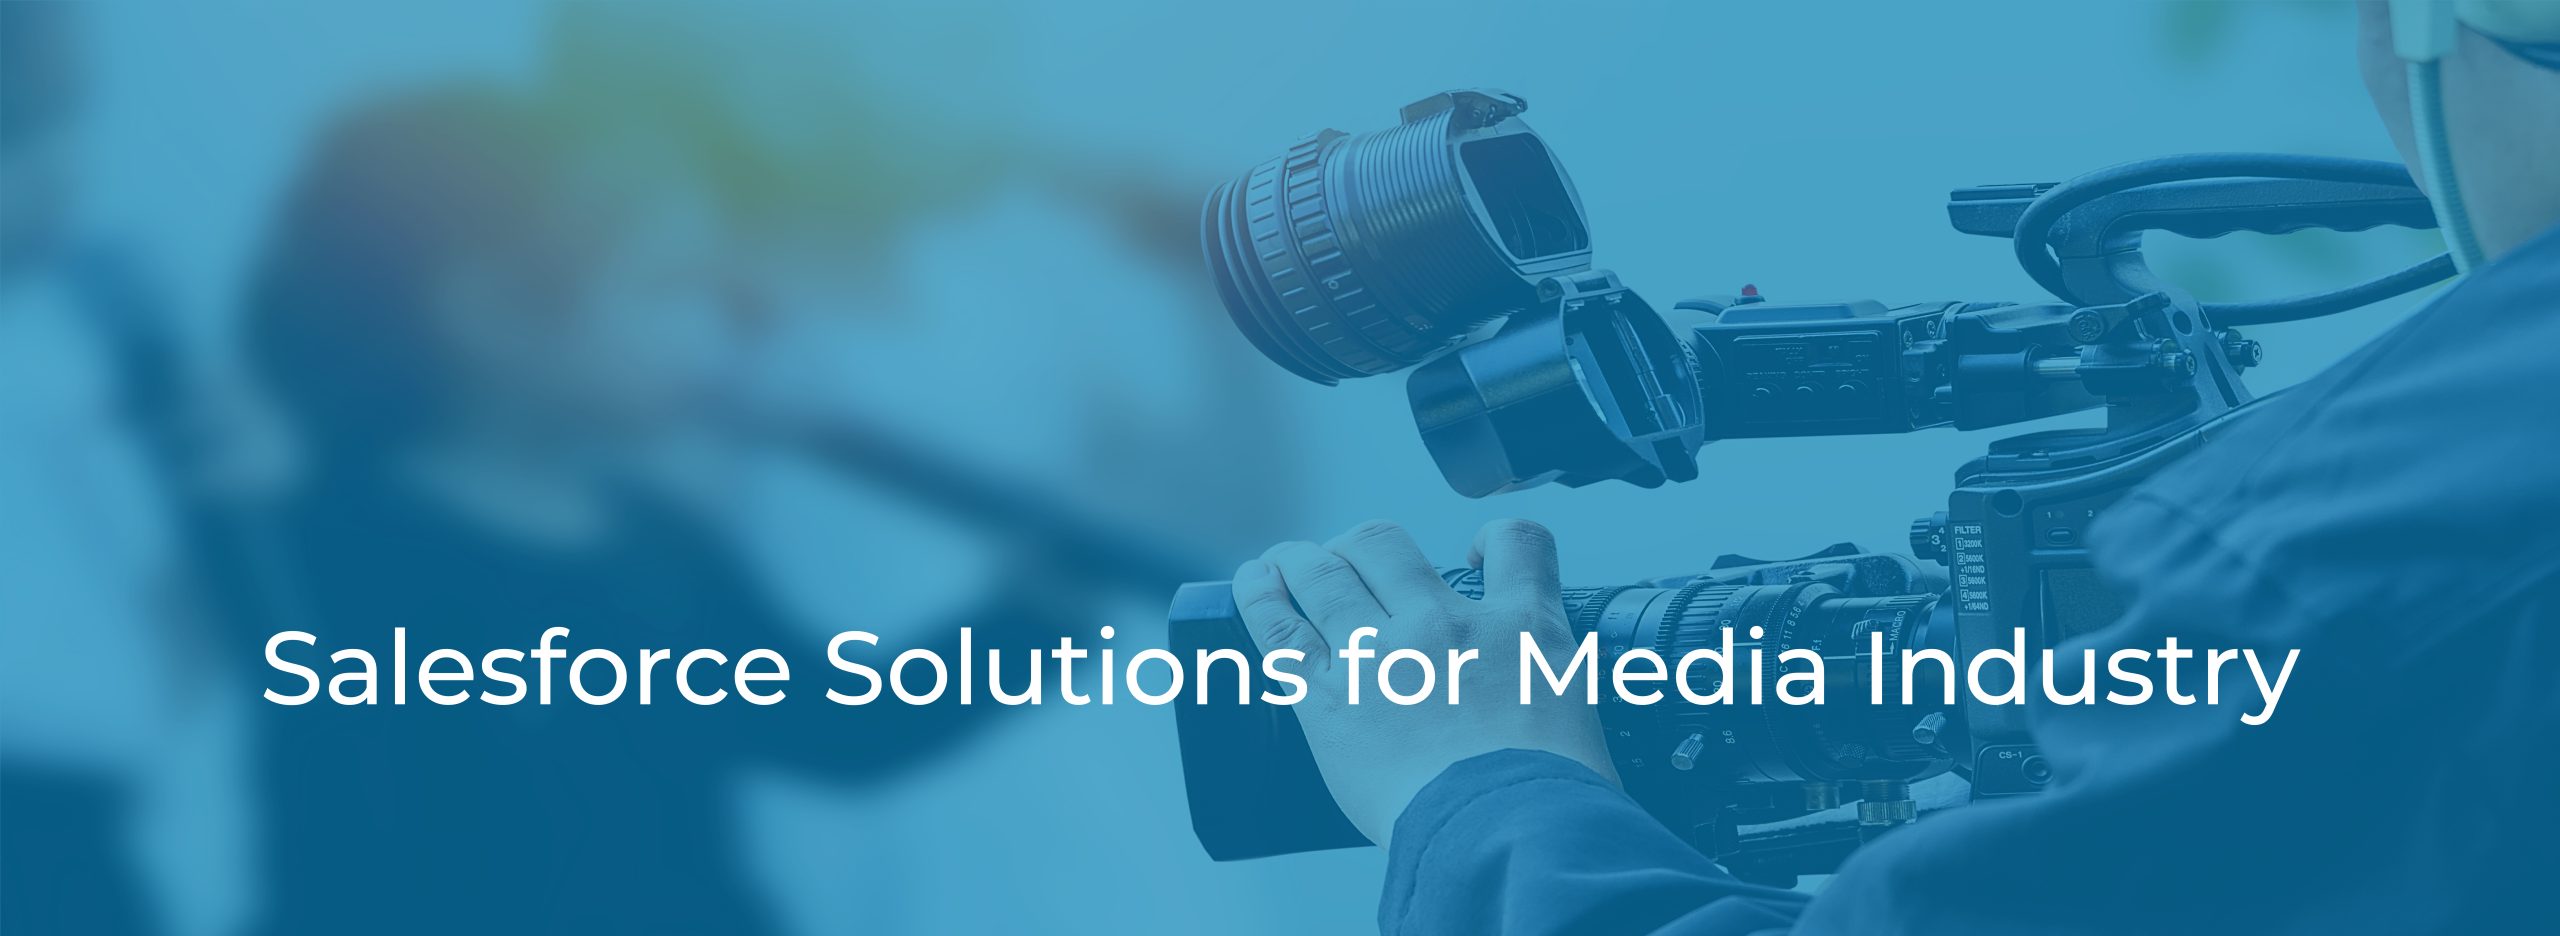 Salesforce Solutions for Media Industry